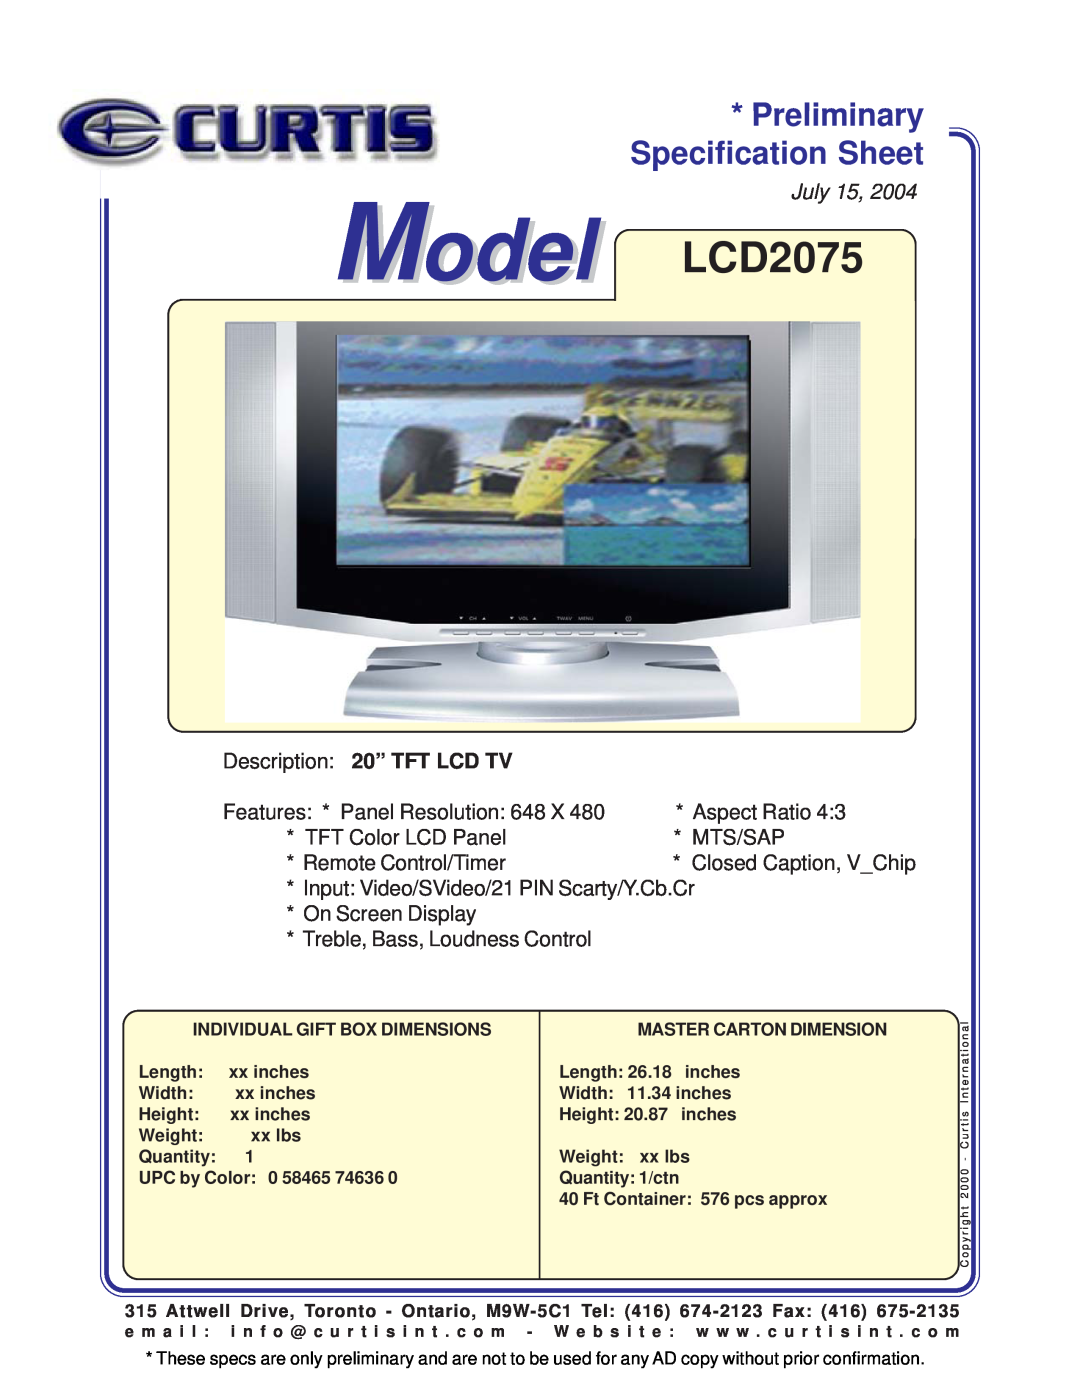 Curtis specifications Specification Sheet, Model LCD2075, Preliminary, July, Description 20” TFT LCD TV, Aspect Ratio 